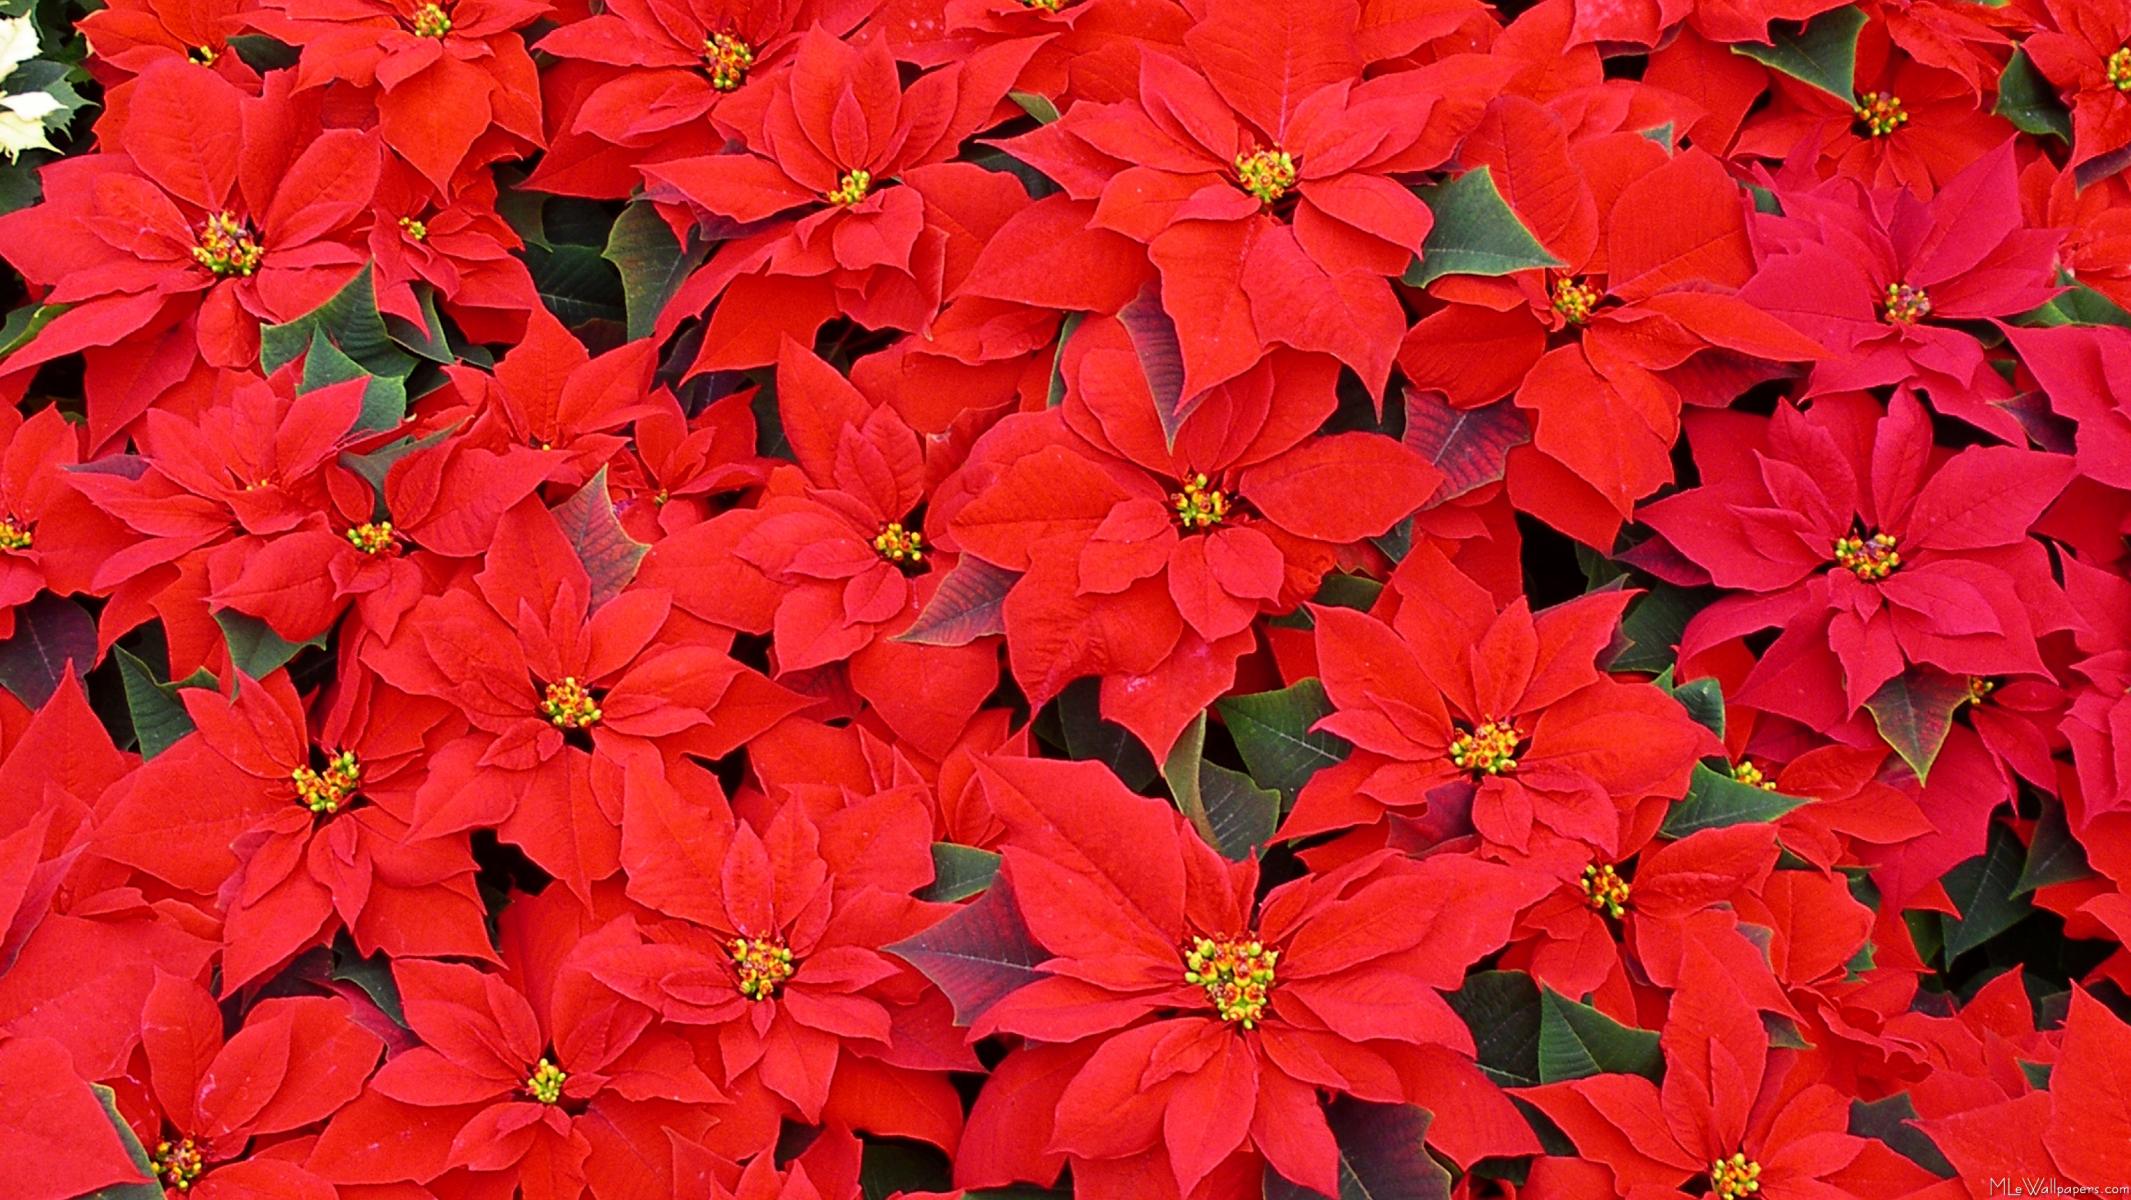 http://www.mlewallpapers.com/image/16x9-Widescreen-1/view/Red-Poinsettias-2.jpg